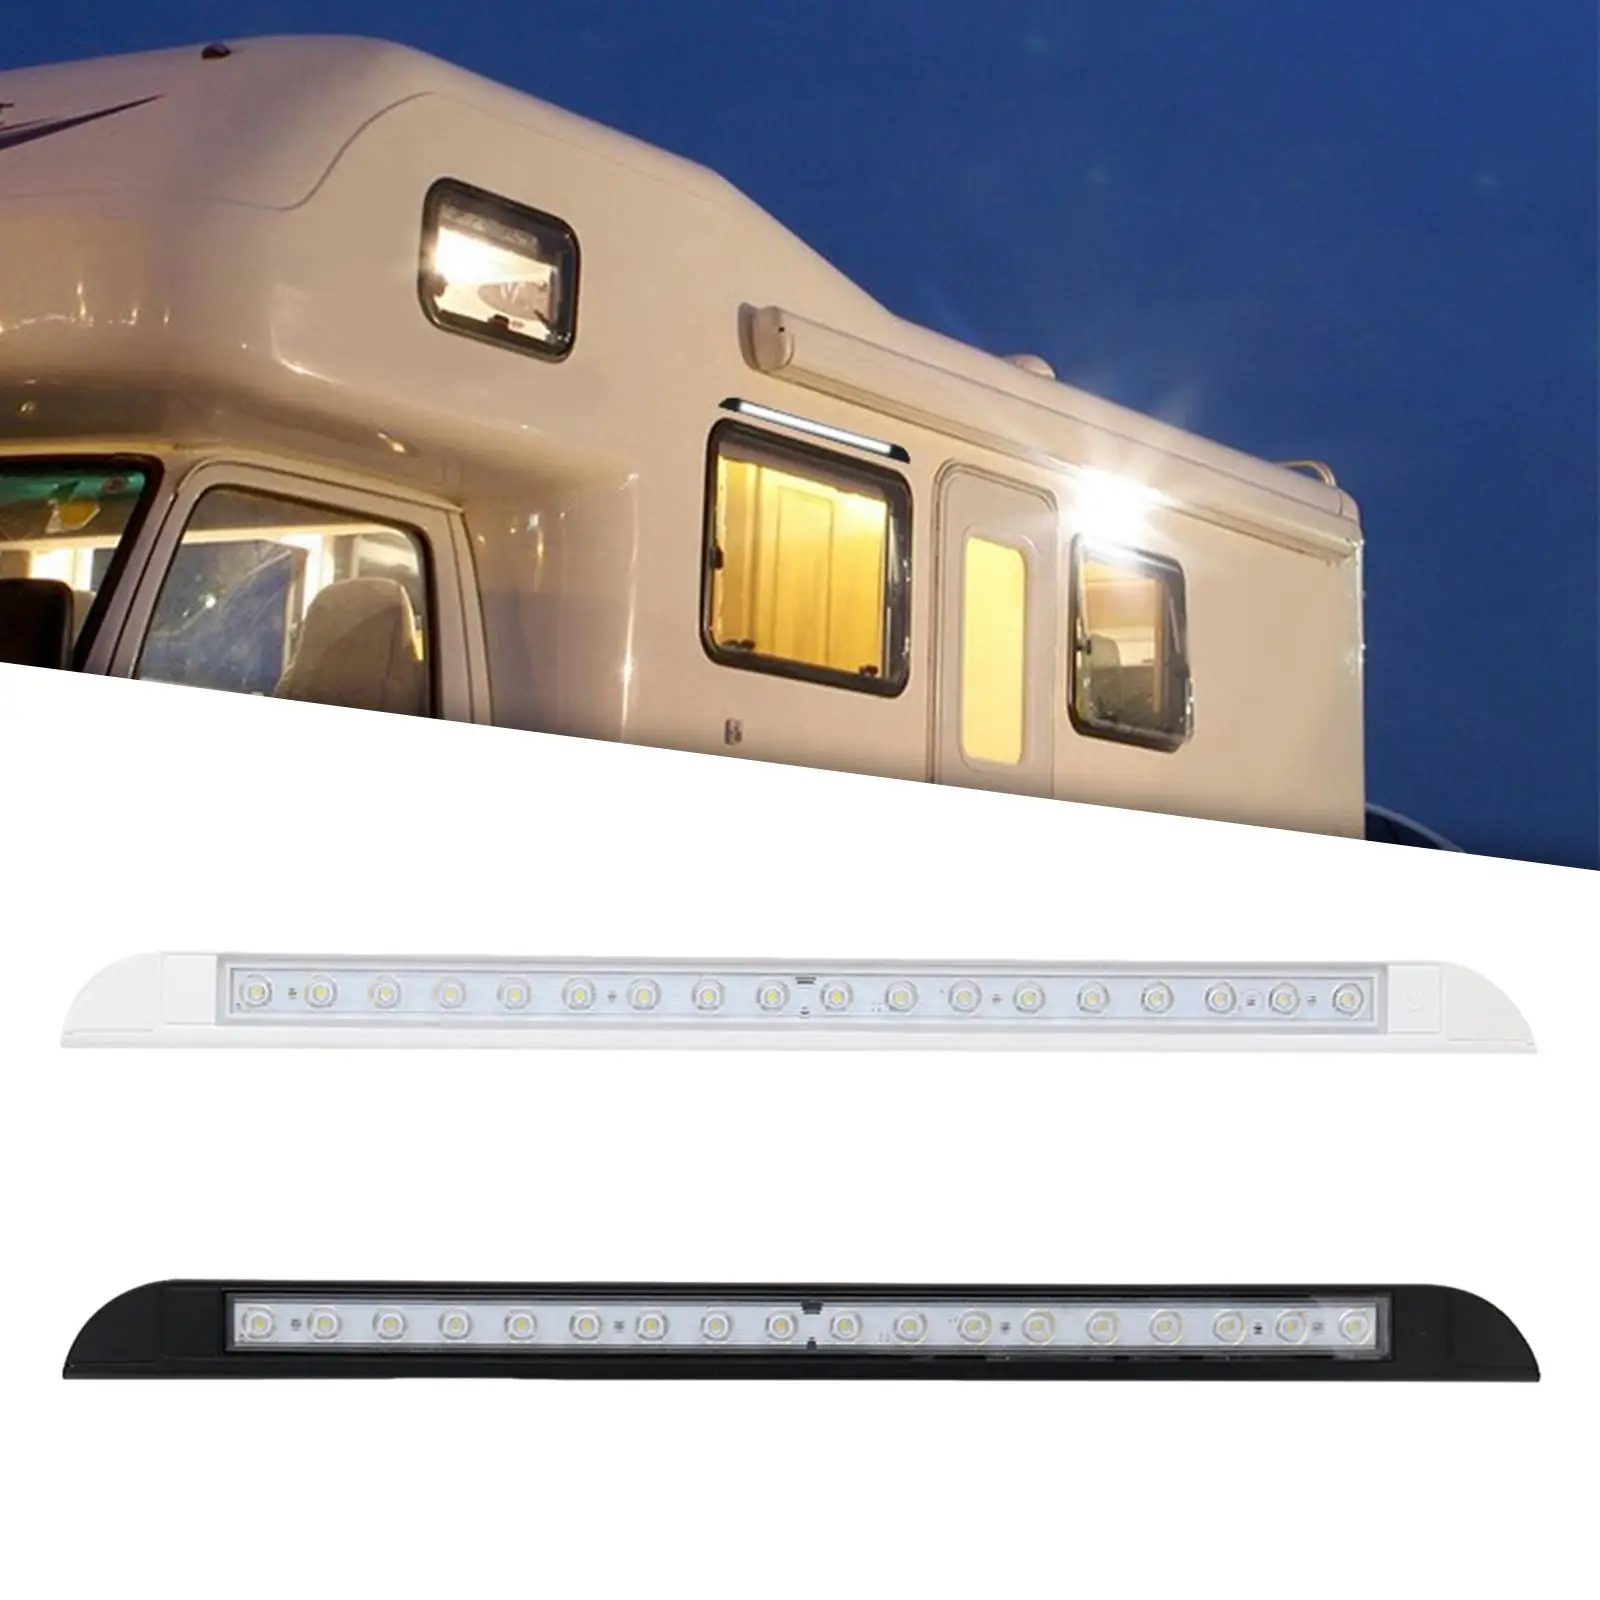 Exterior Awning light Utility Portable for Outdoor Motorhome BBQ